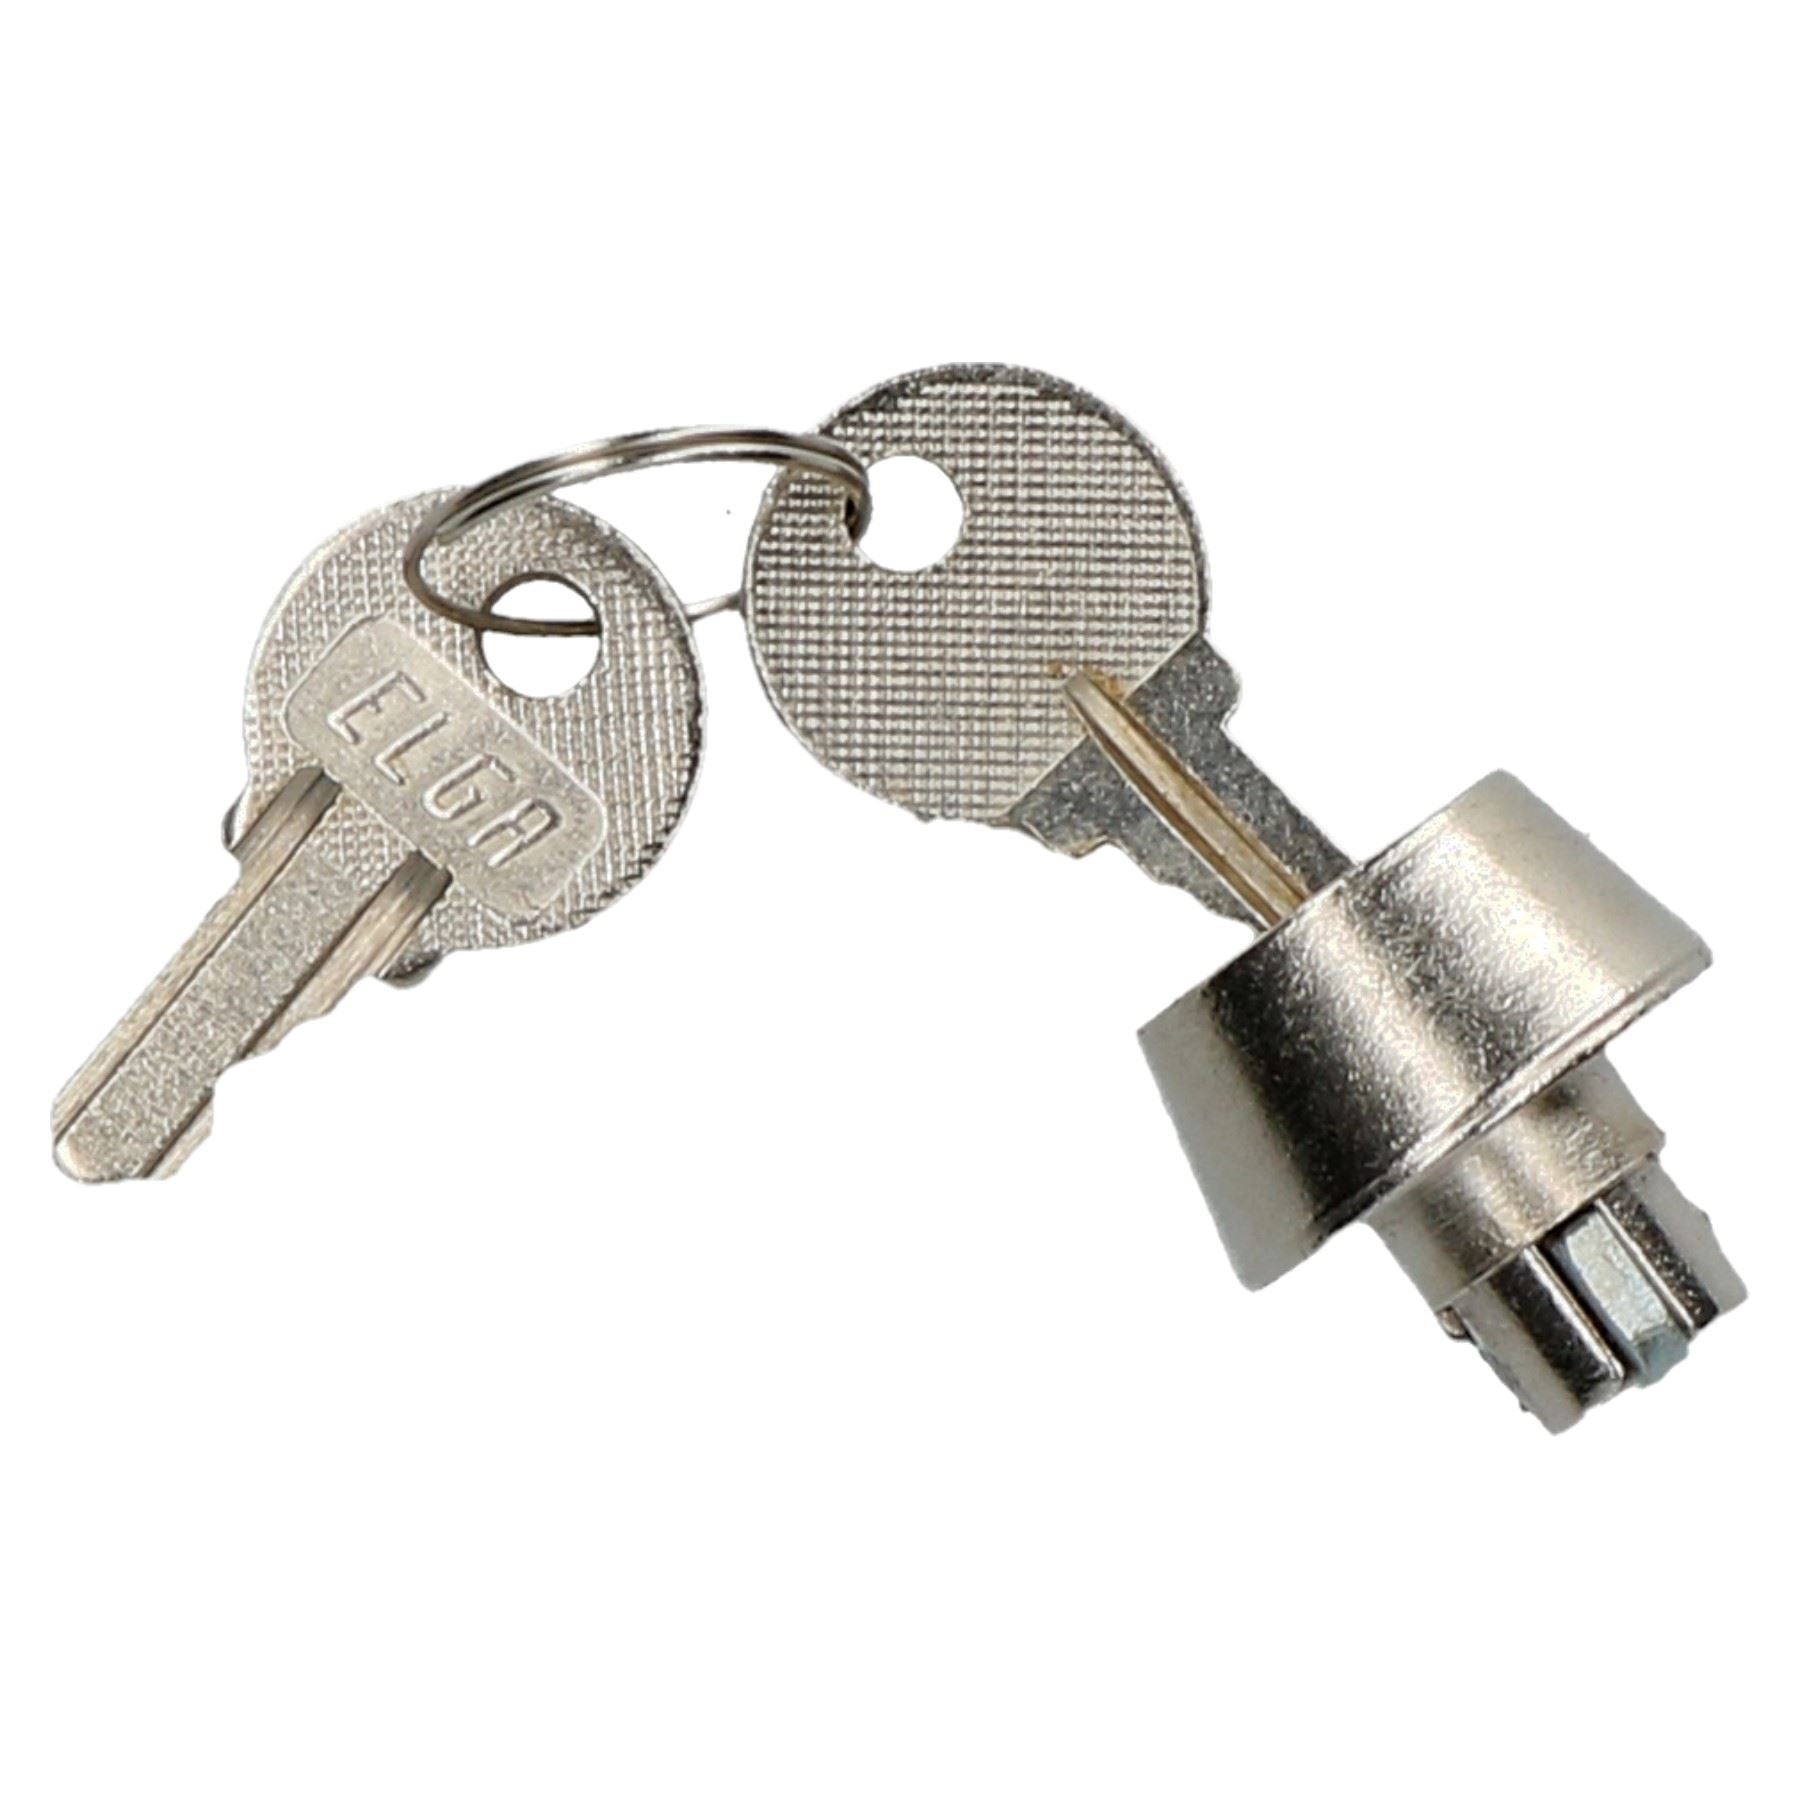 Trailer Hitch Security Lock for Knott Cast Couplings with 2 Keys